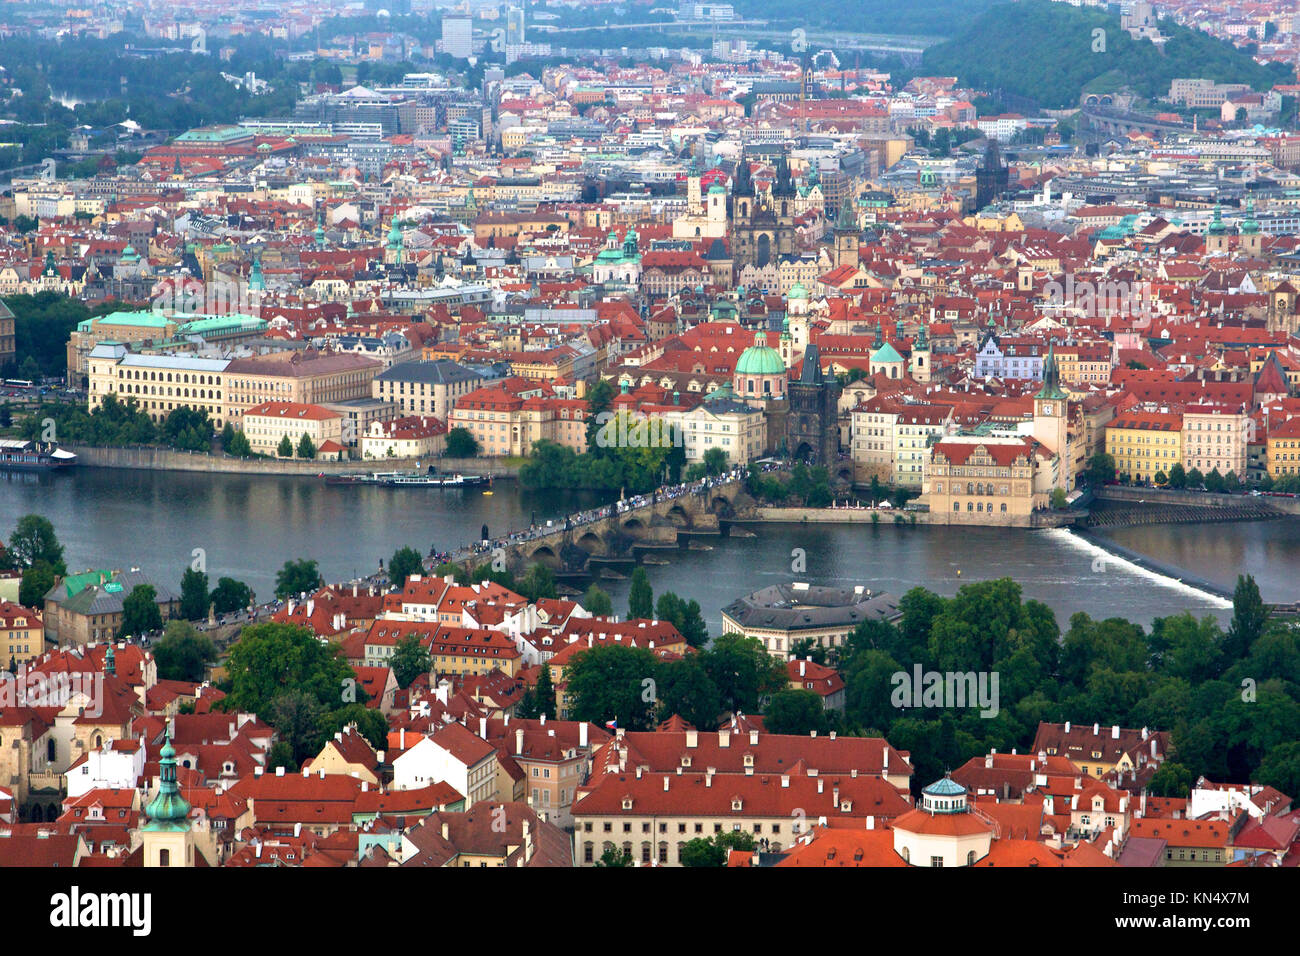 Above the roofs of Prague, old Central European metropolis, modern tourist magnet, and capital of the Czech Republic. Stock Photo